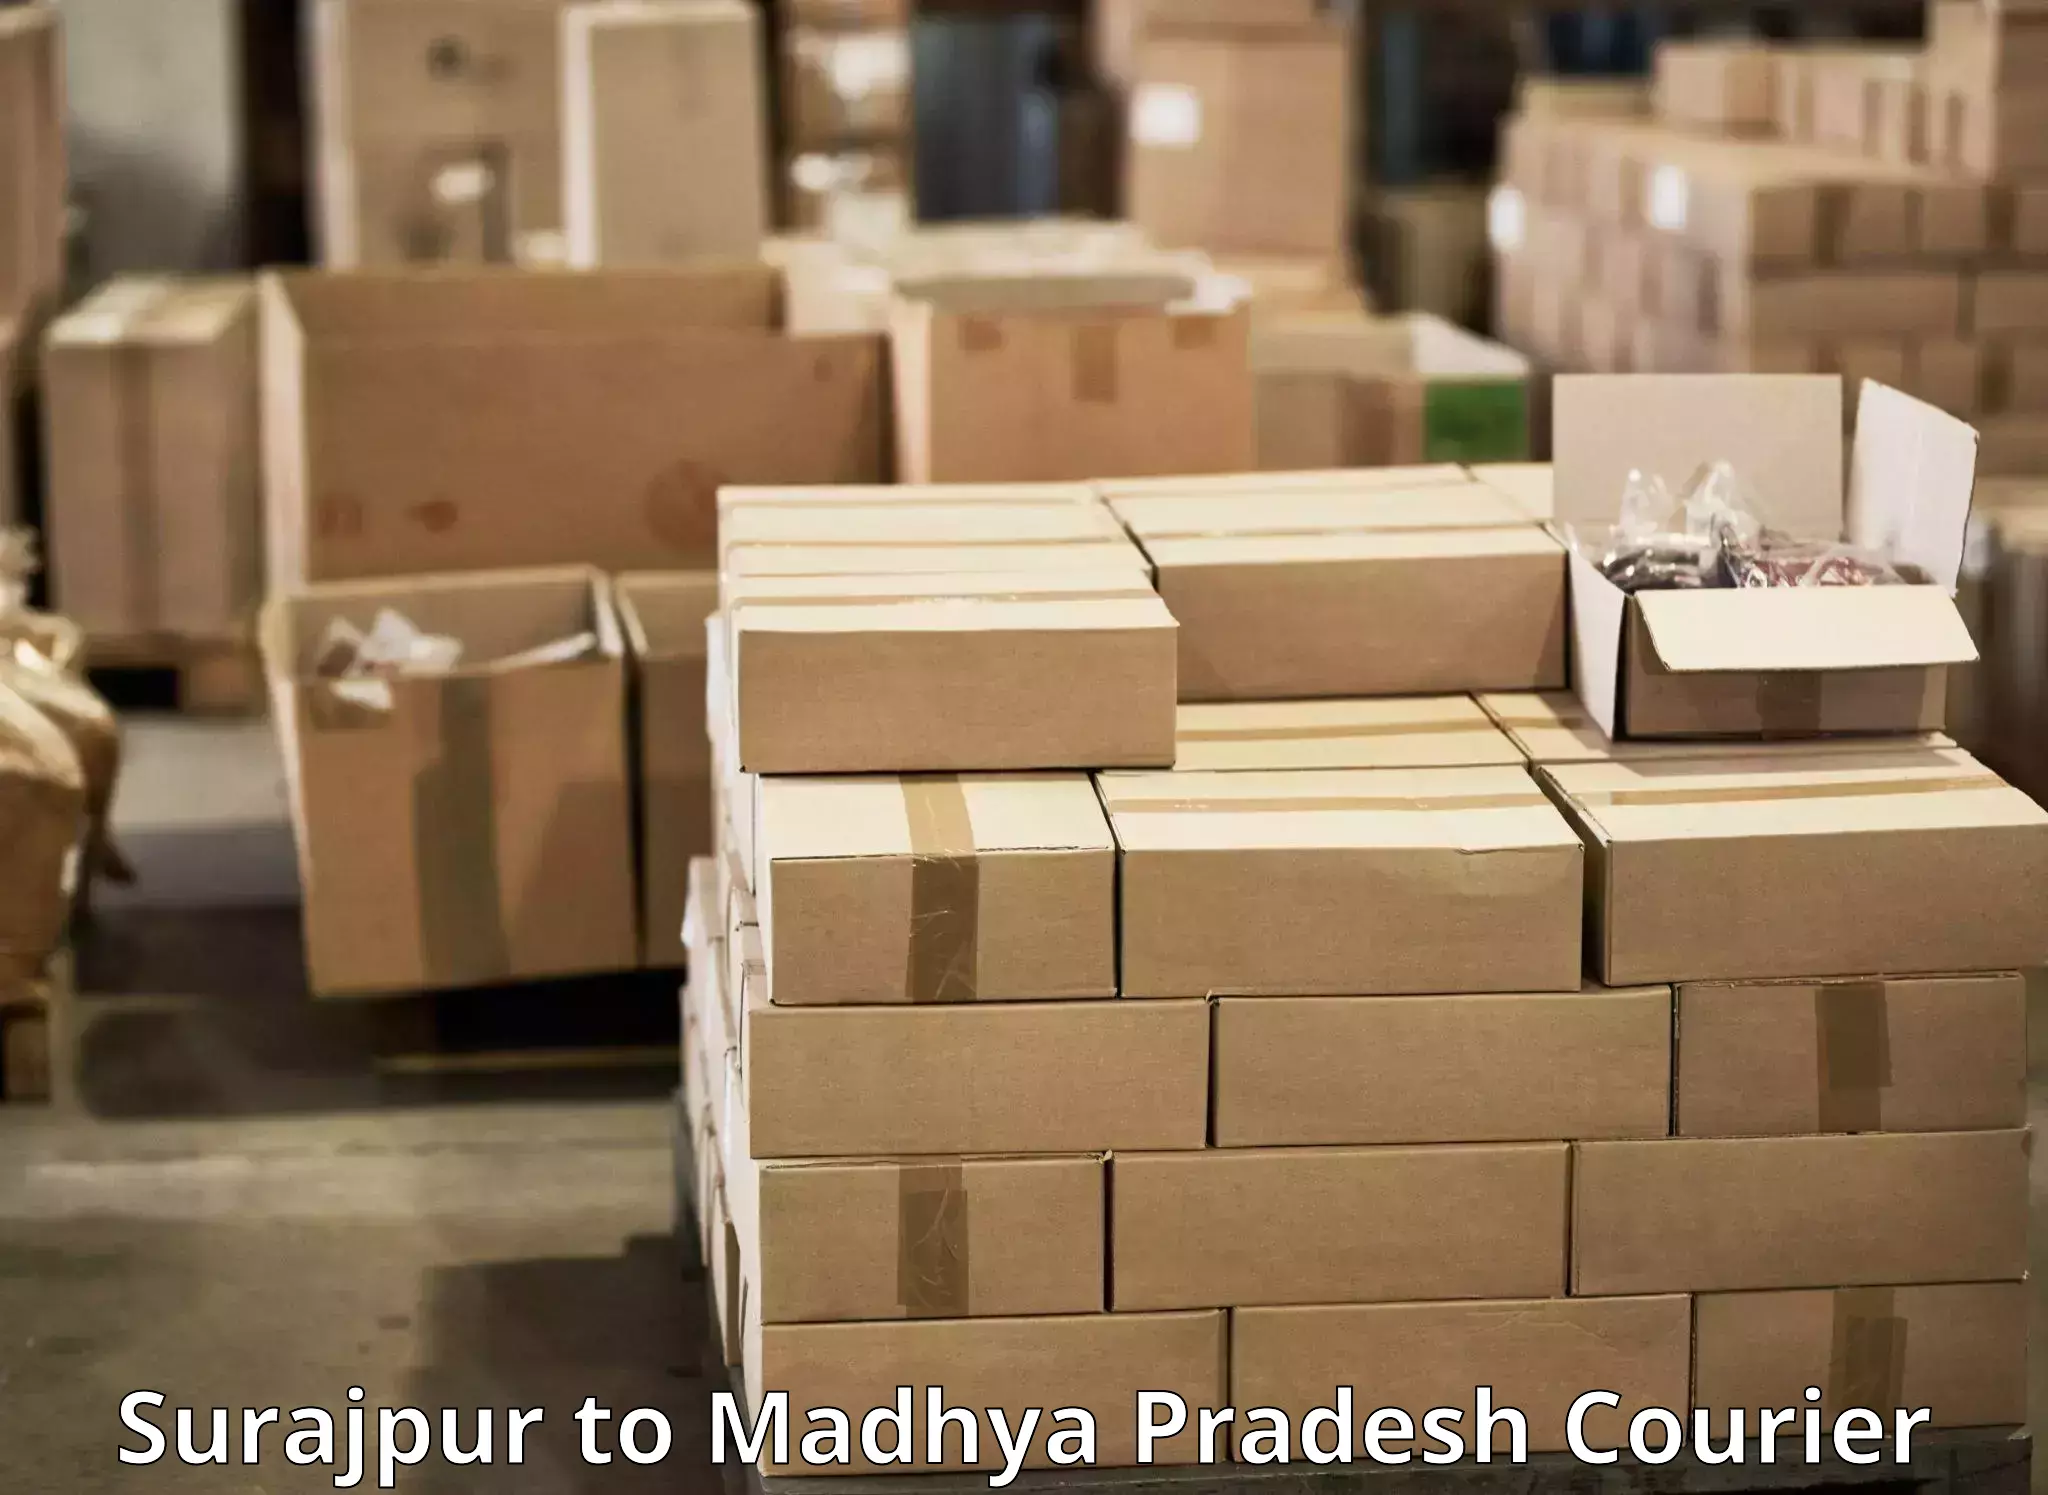 State-of-the-art courier technology Surajpur to Khandwa